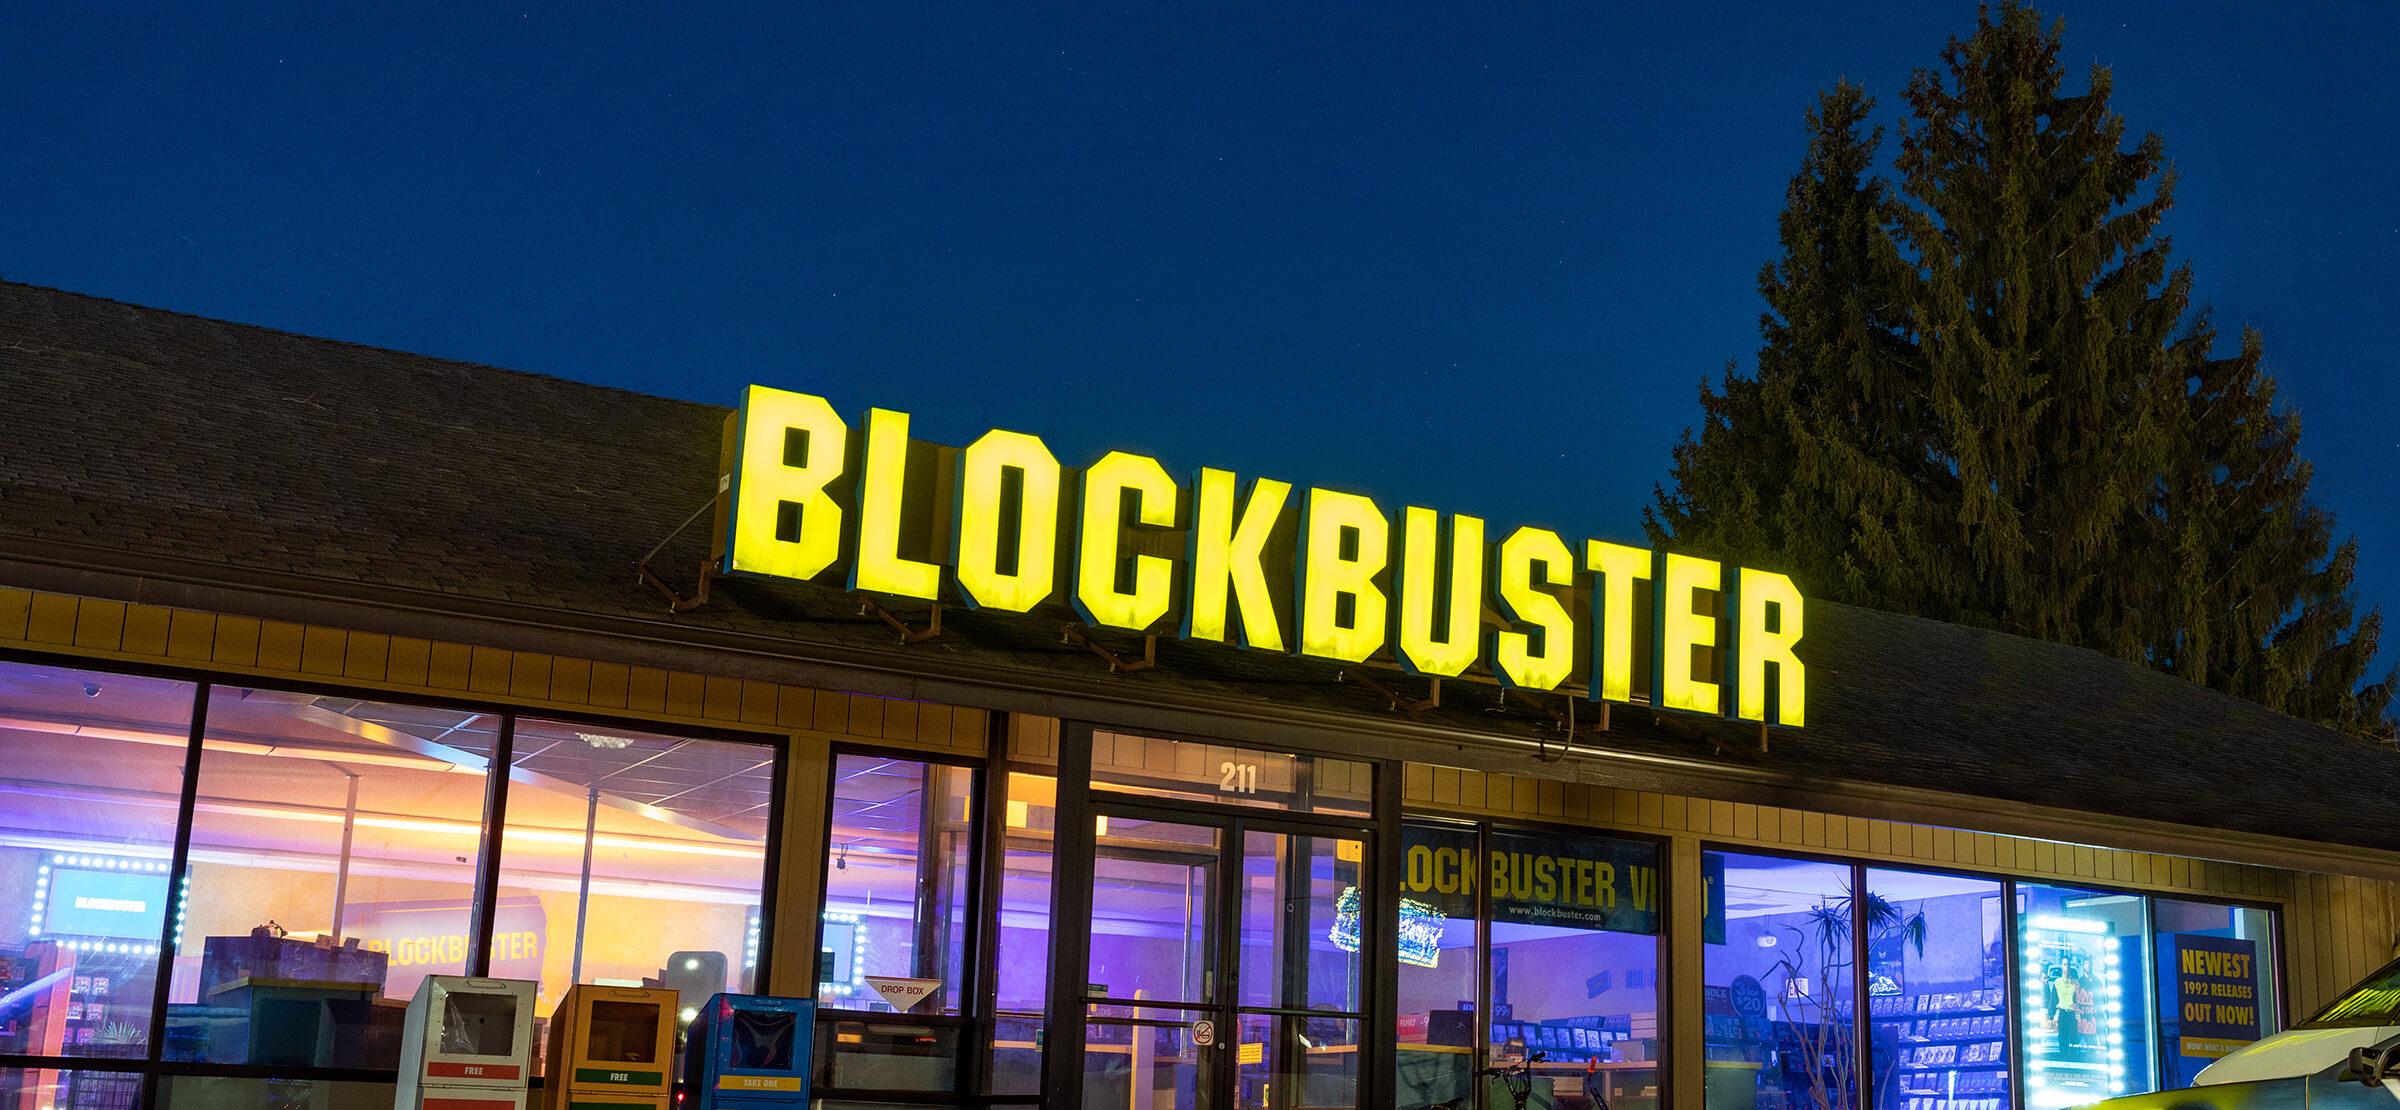 Last Blockbuster store turned into Airbnb